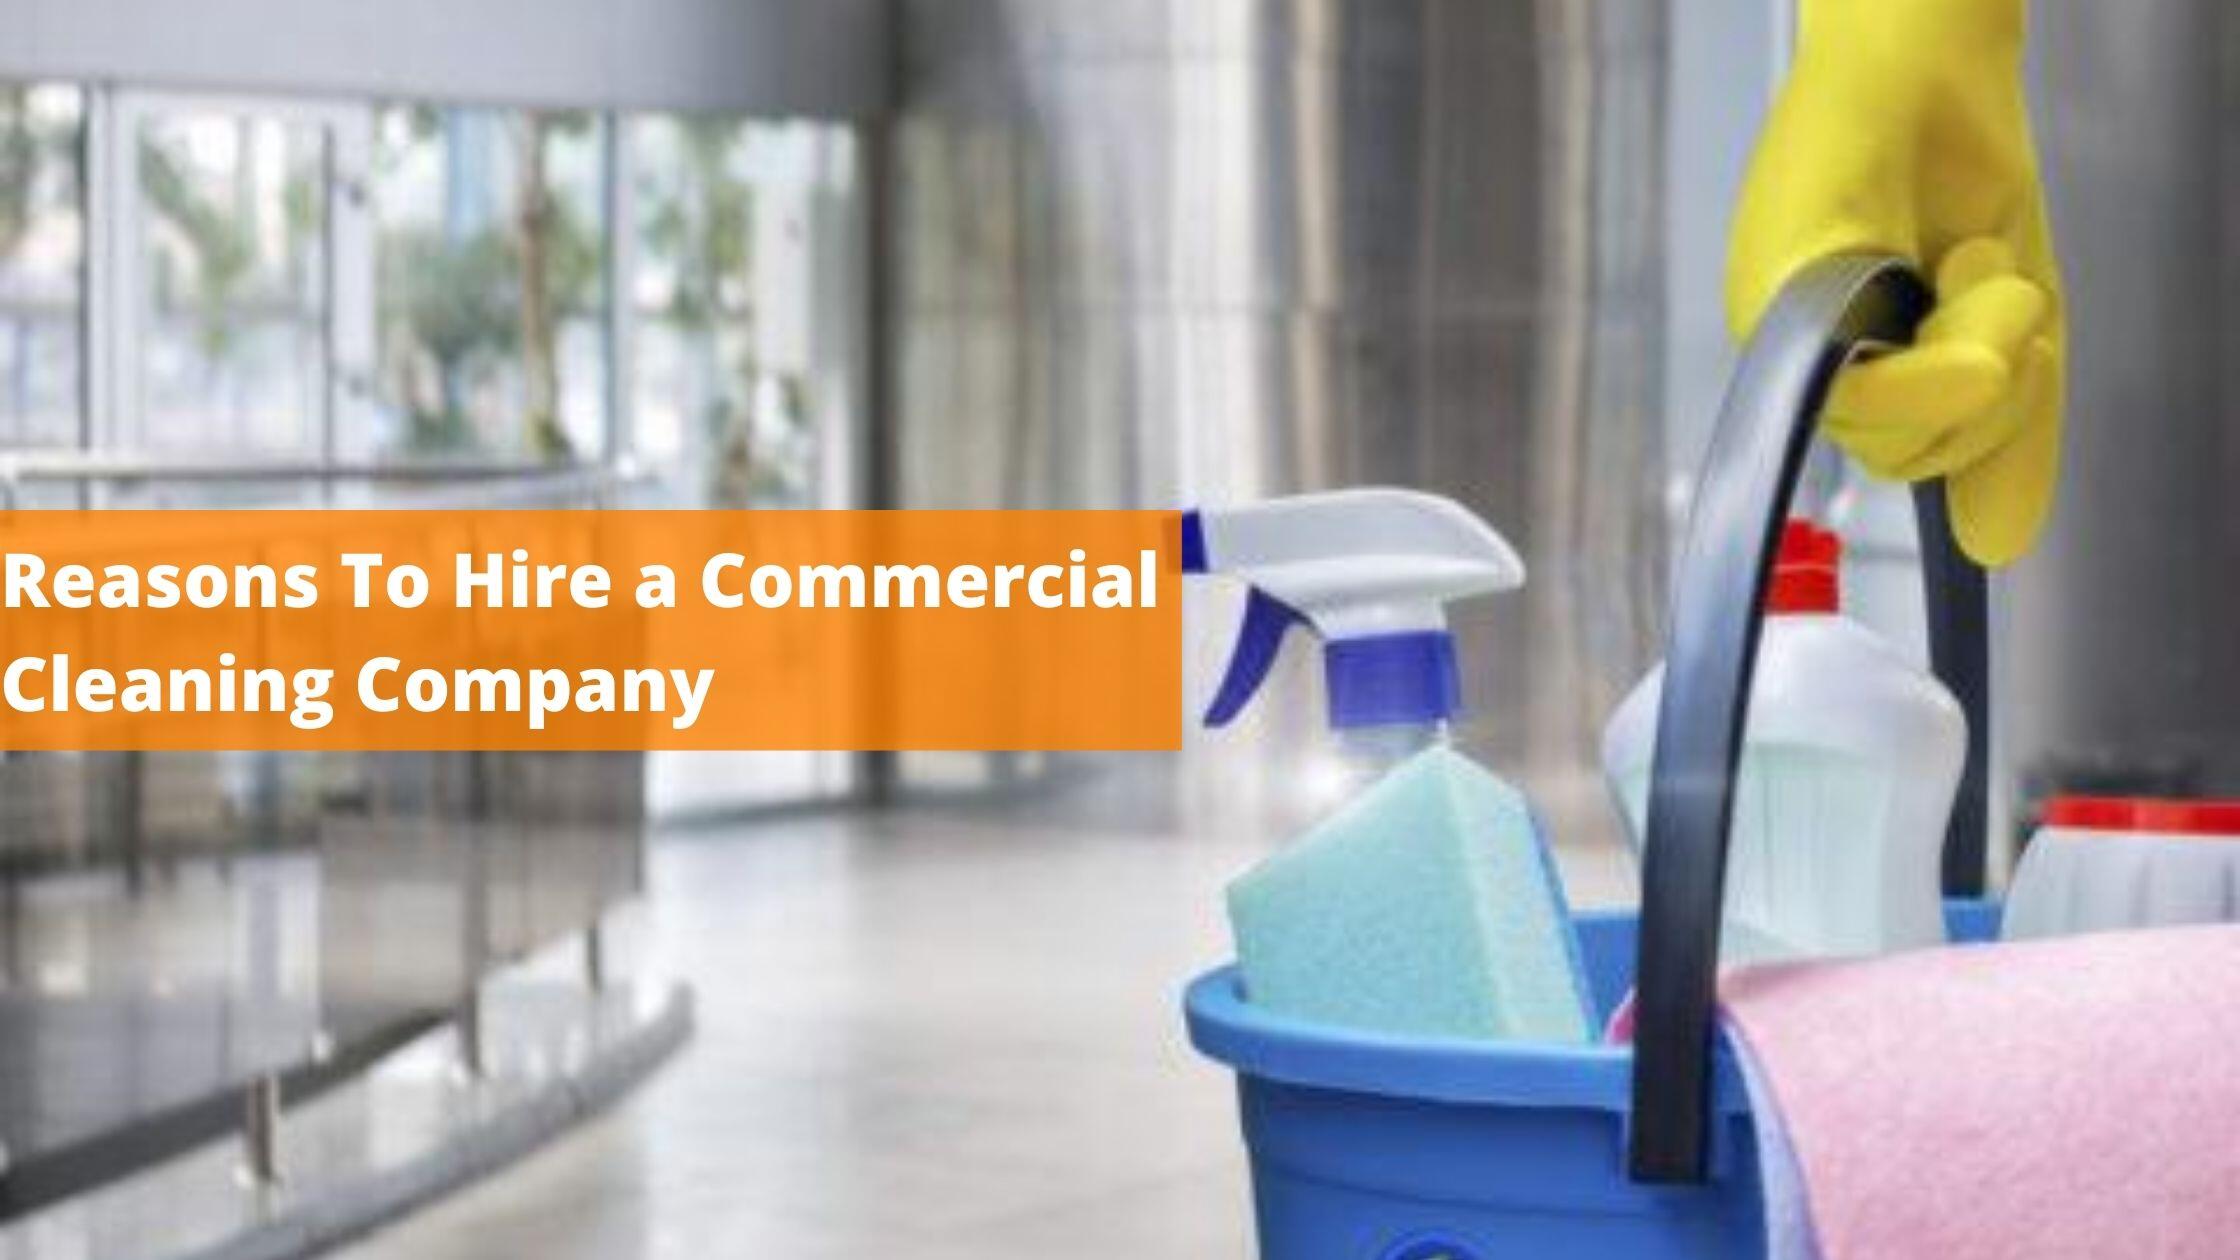 Reasons to hire a commercial cleaning company